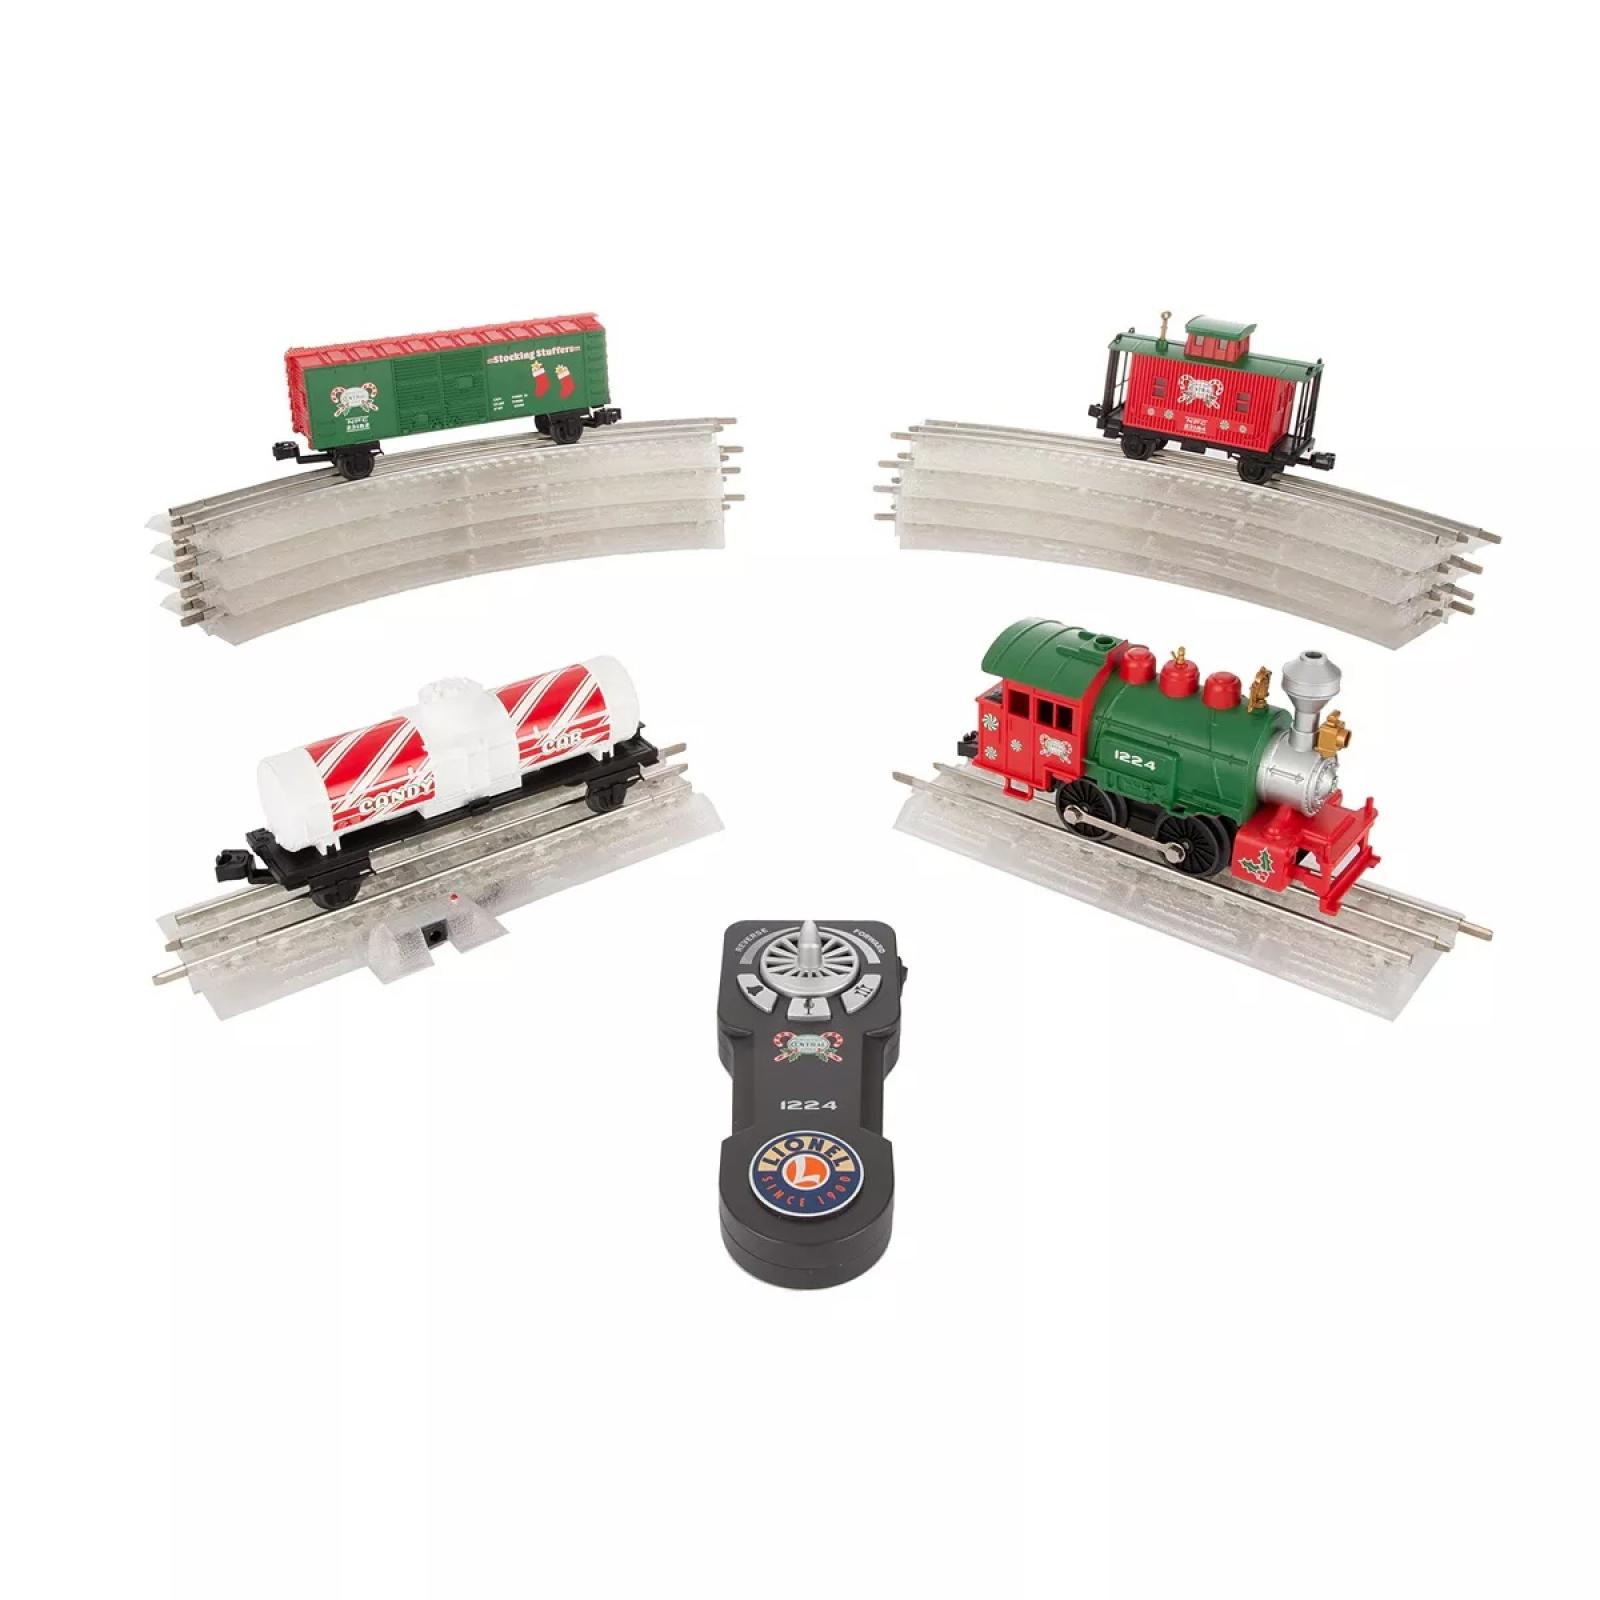 Lionel Junction North Pole Central Ready-To-Run Electric O-Gauge Train Set